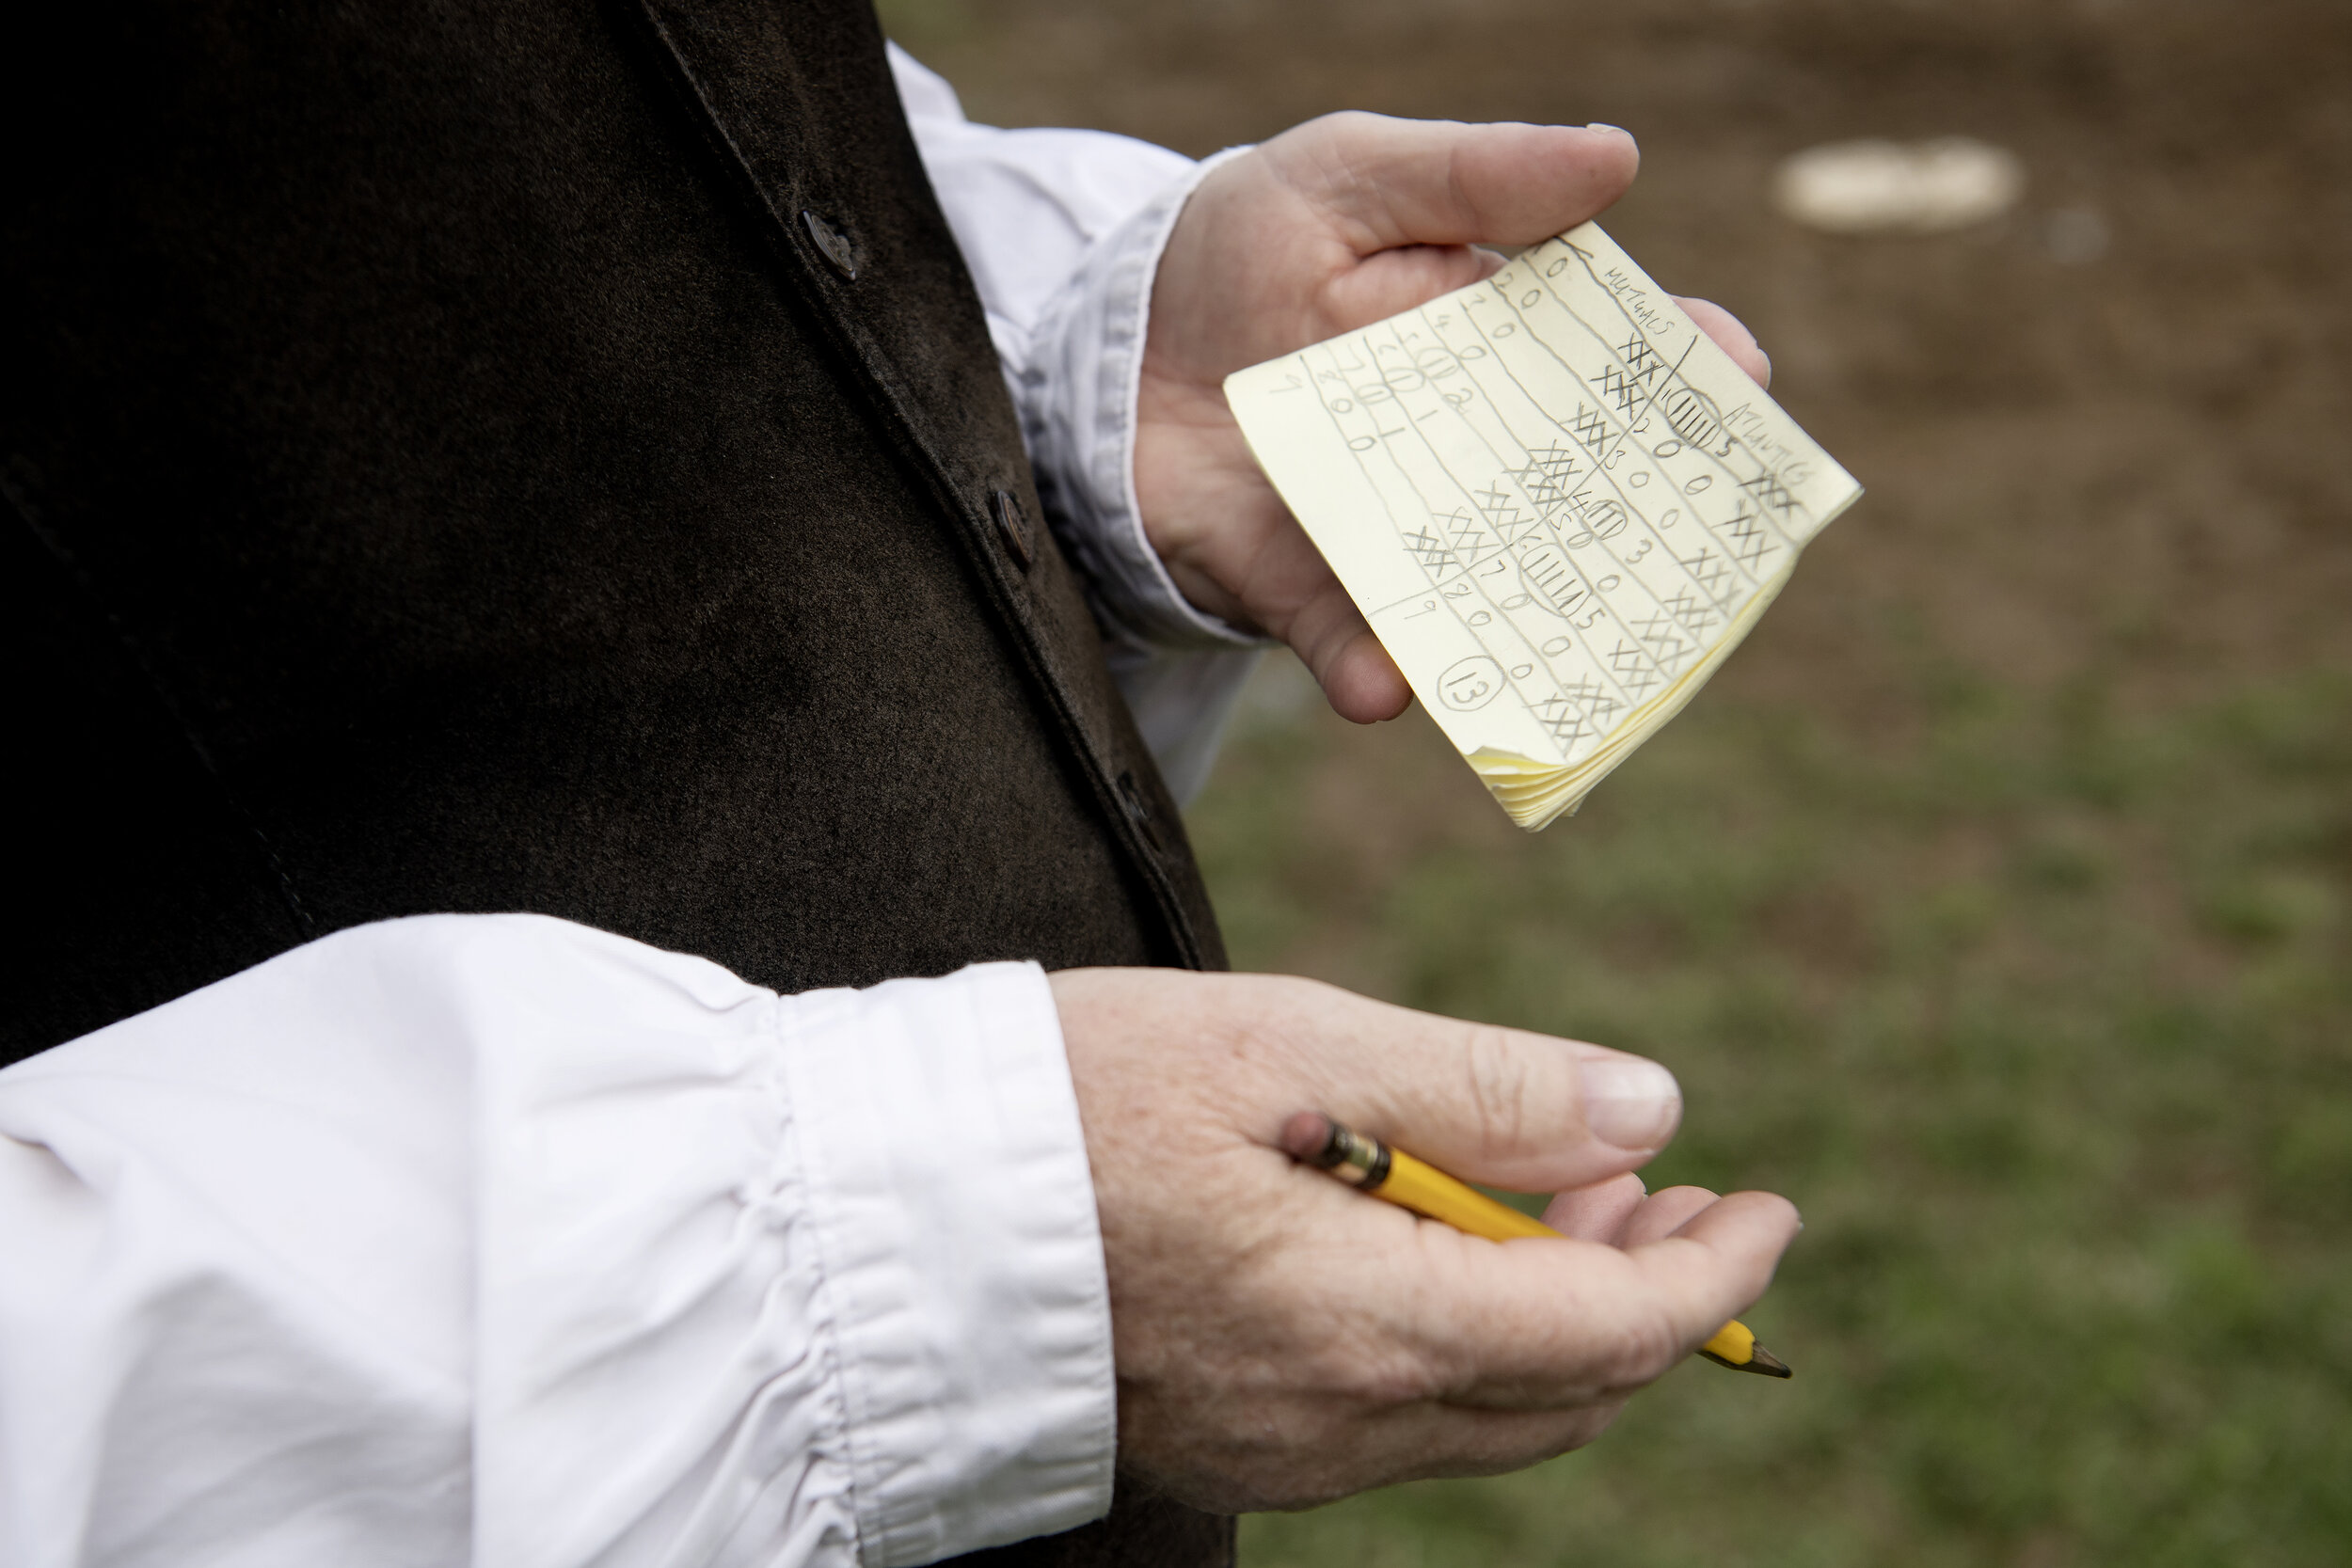  An umpire keeps score during the game between the New York Mutuals and the Brooklyn Atlantics with a system of X's and tallies to denote runs and strikes at Old Bethpage Village Restoration on April 13, 2019 in Old Bethpage, NY. The Brooklyn Atlanti